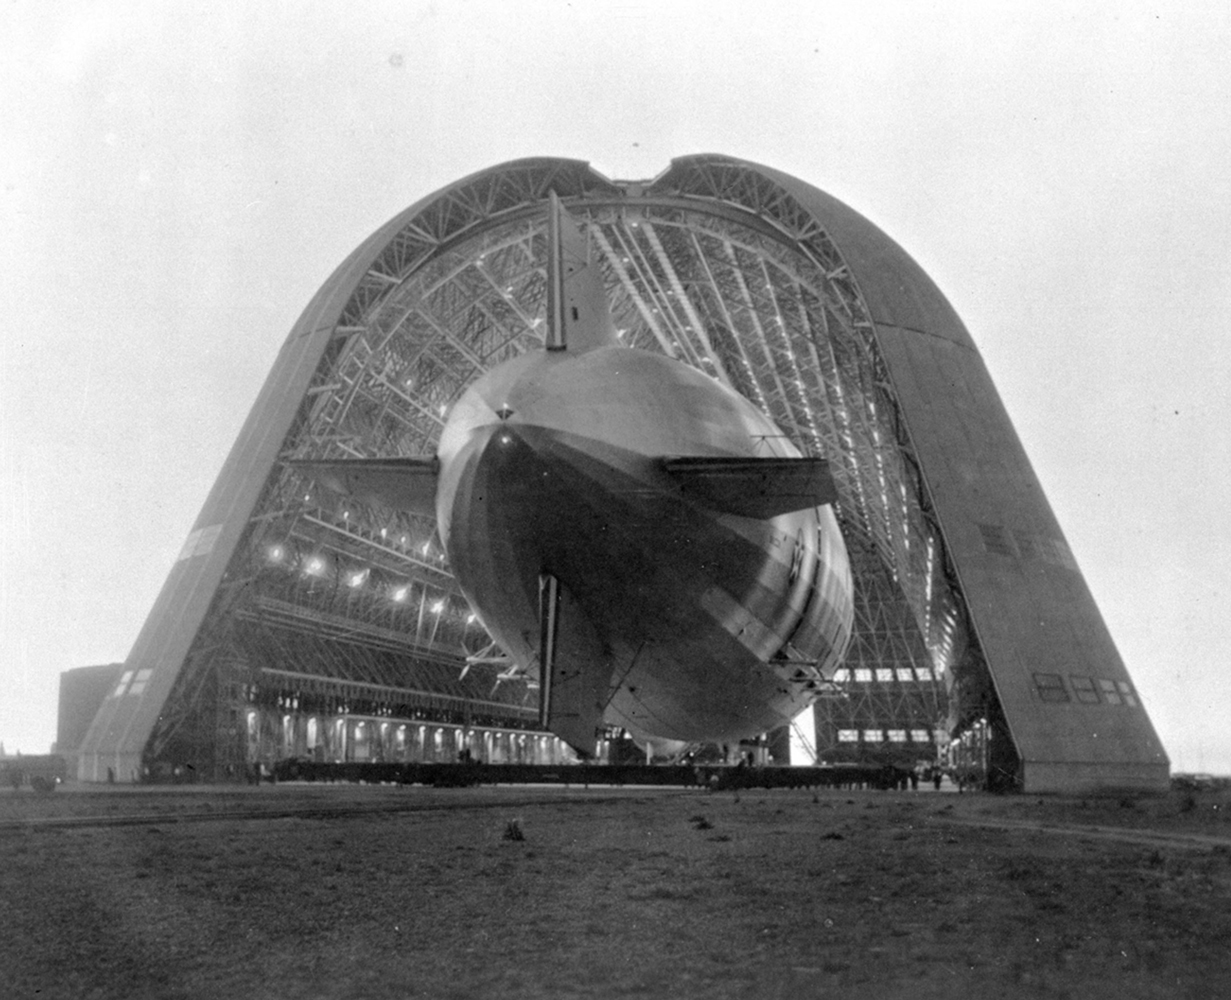 The USS Macon dirigible entering Hangar 1 through its enormous open doors. The inside of the huge hangar is dramatically illuminated.